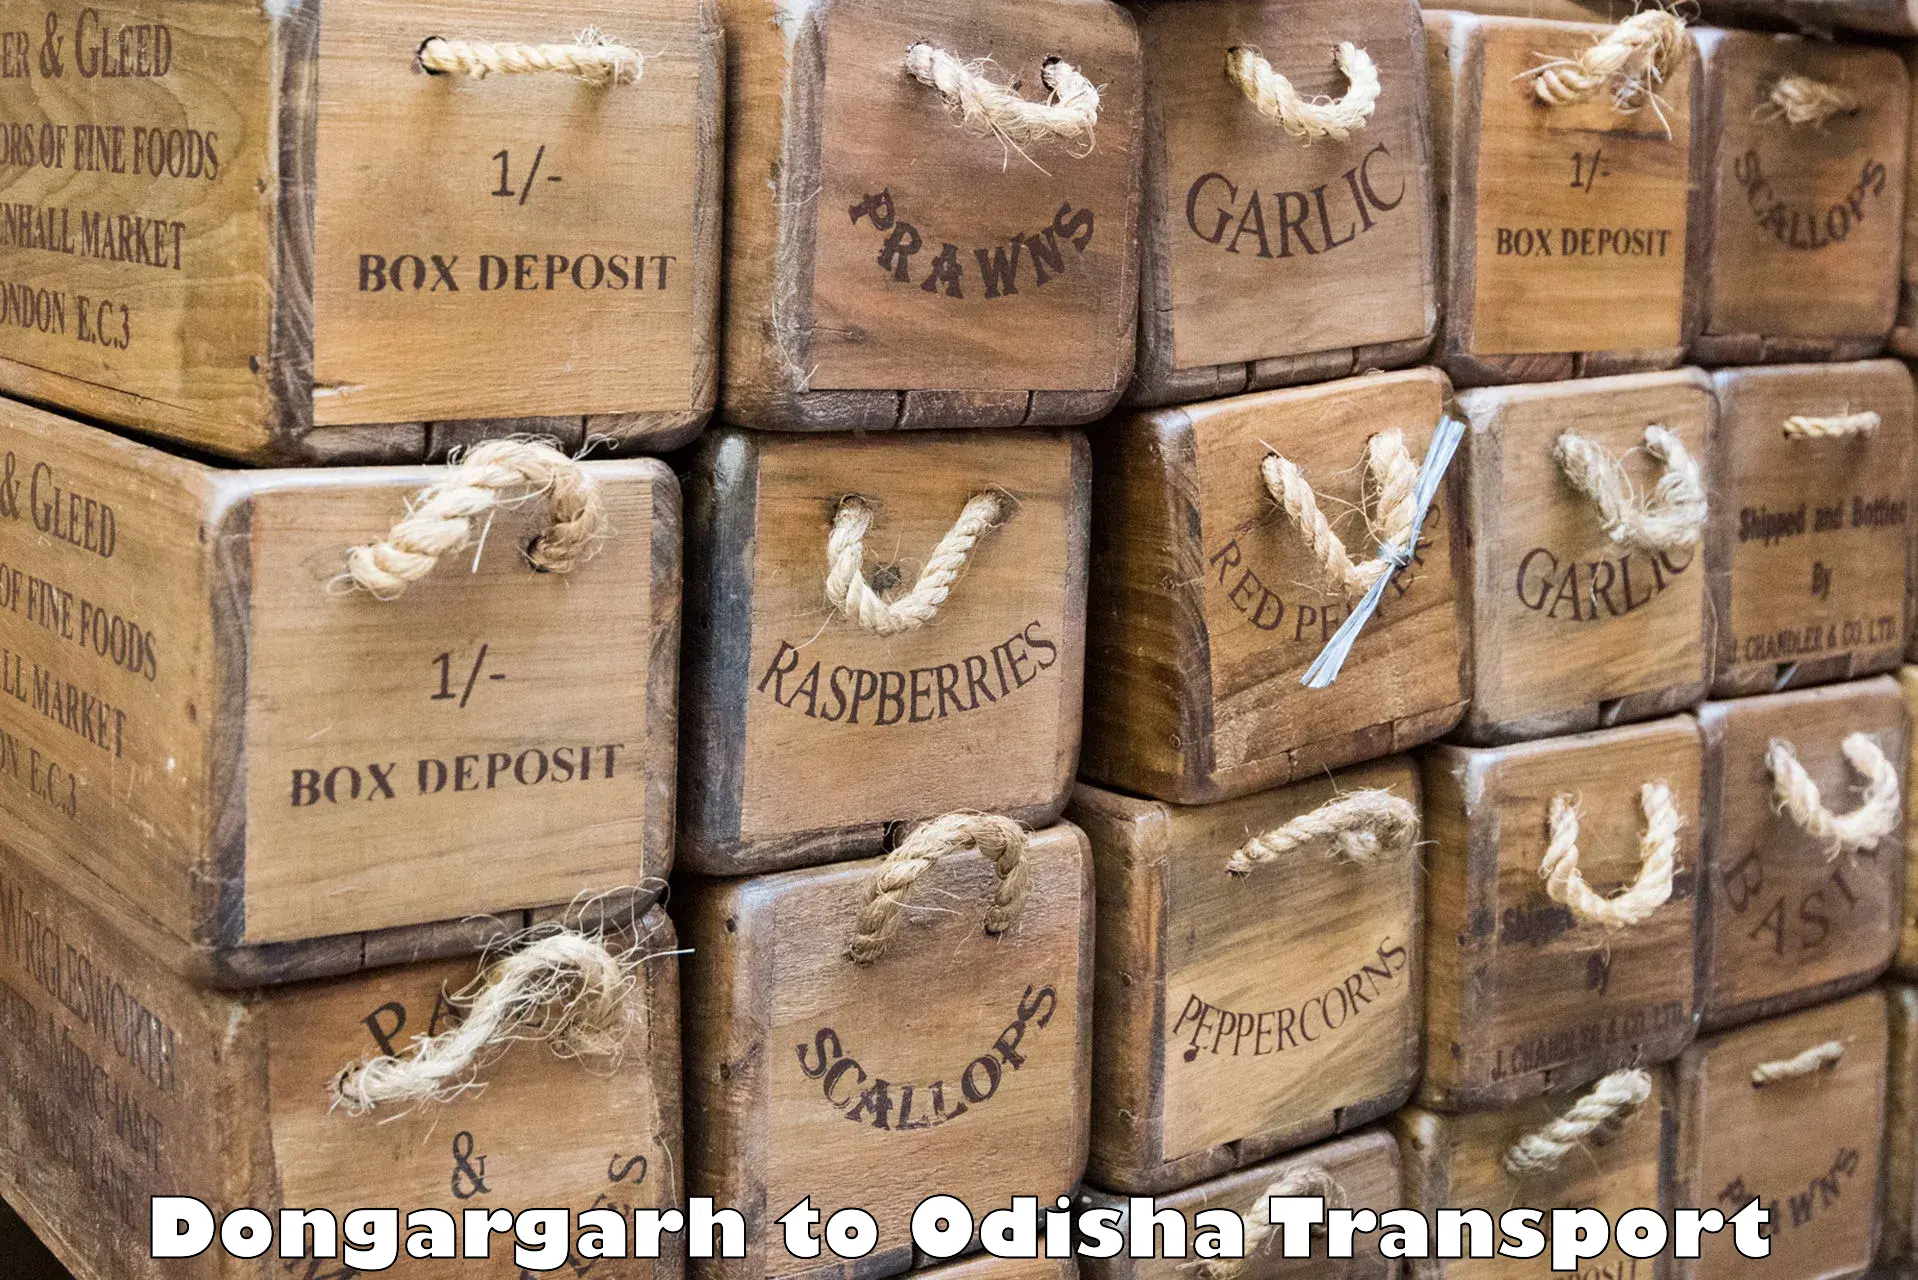 Container transport service Dongargarh to Patnagarh